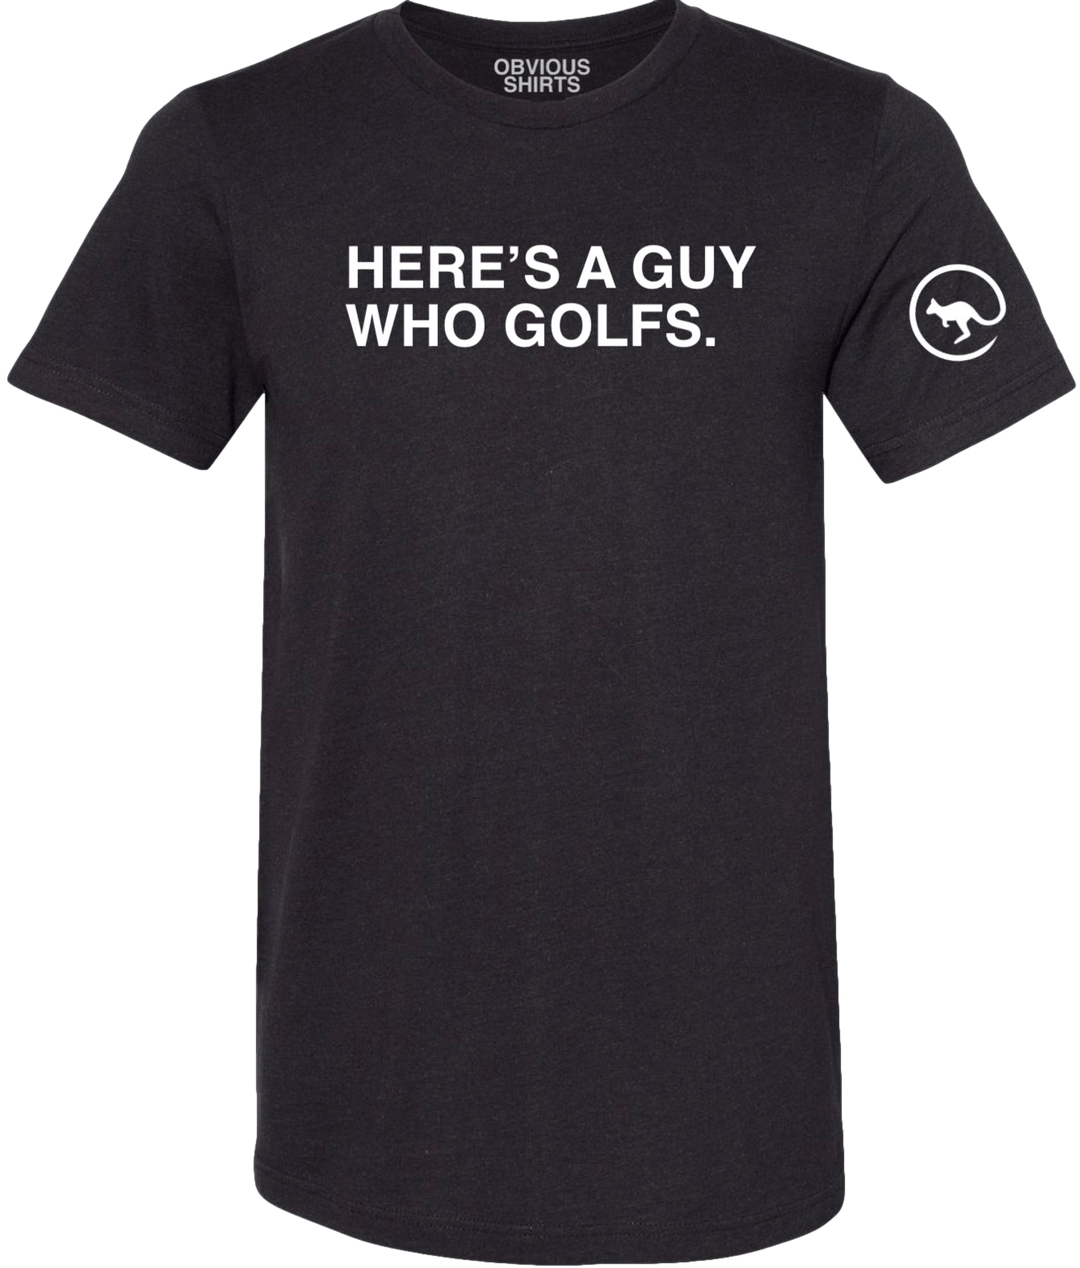 HERE'S A GUY WHO GOLFS. - OBVIOUS SHIRTS